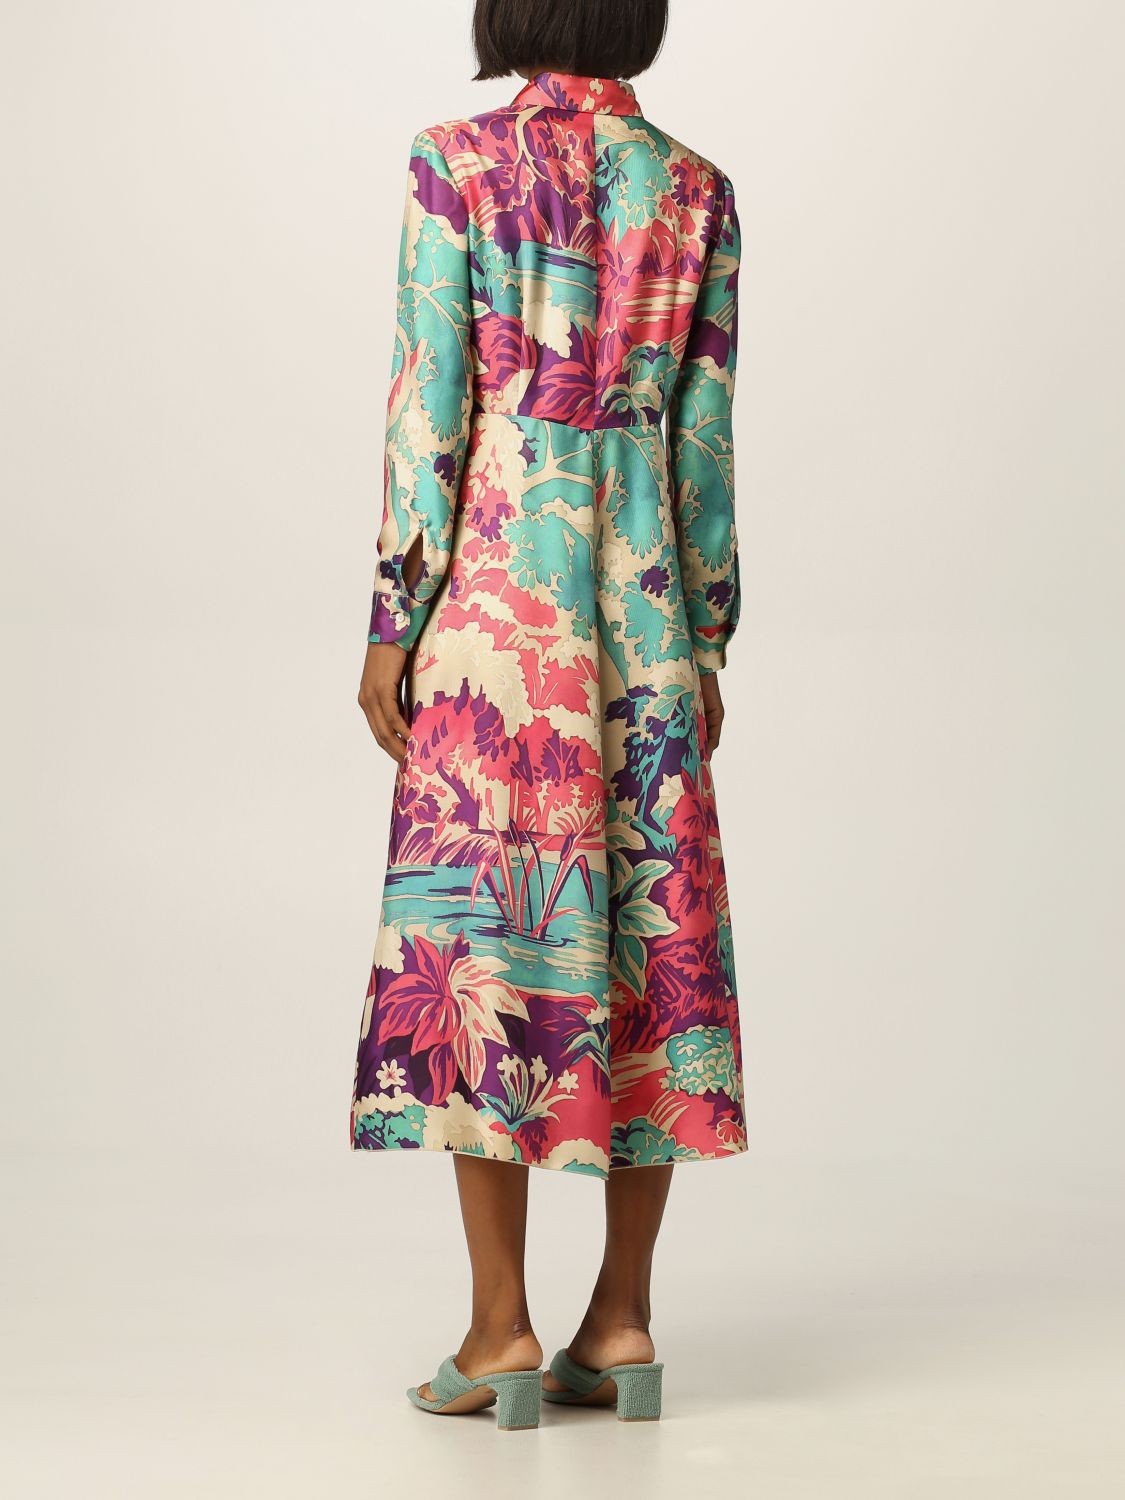 Red Valentino shirt dress with Emerald Forest print